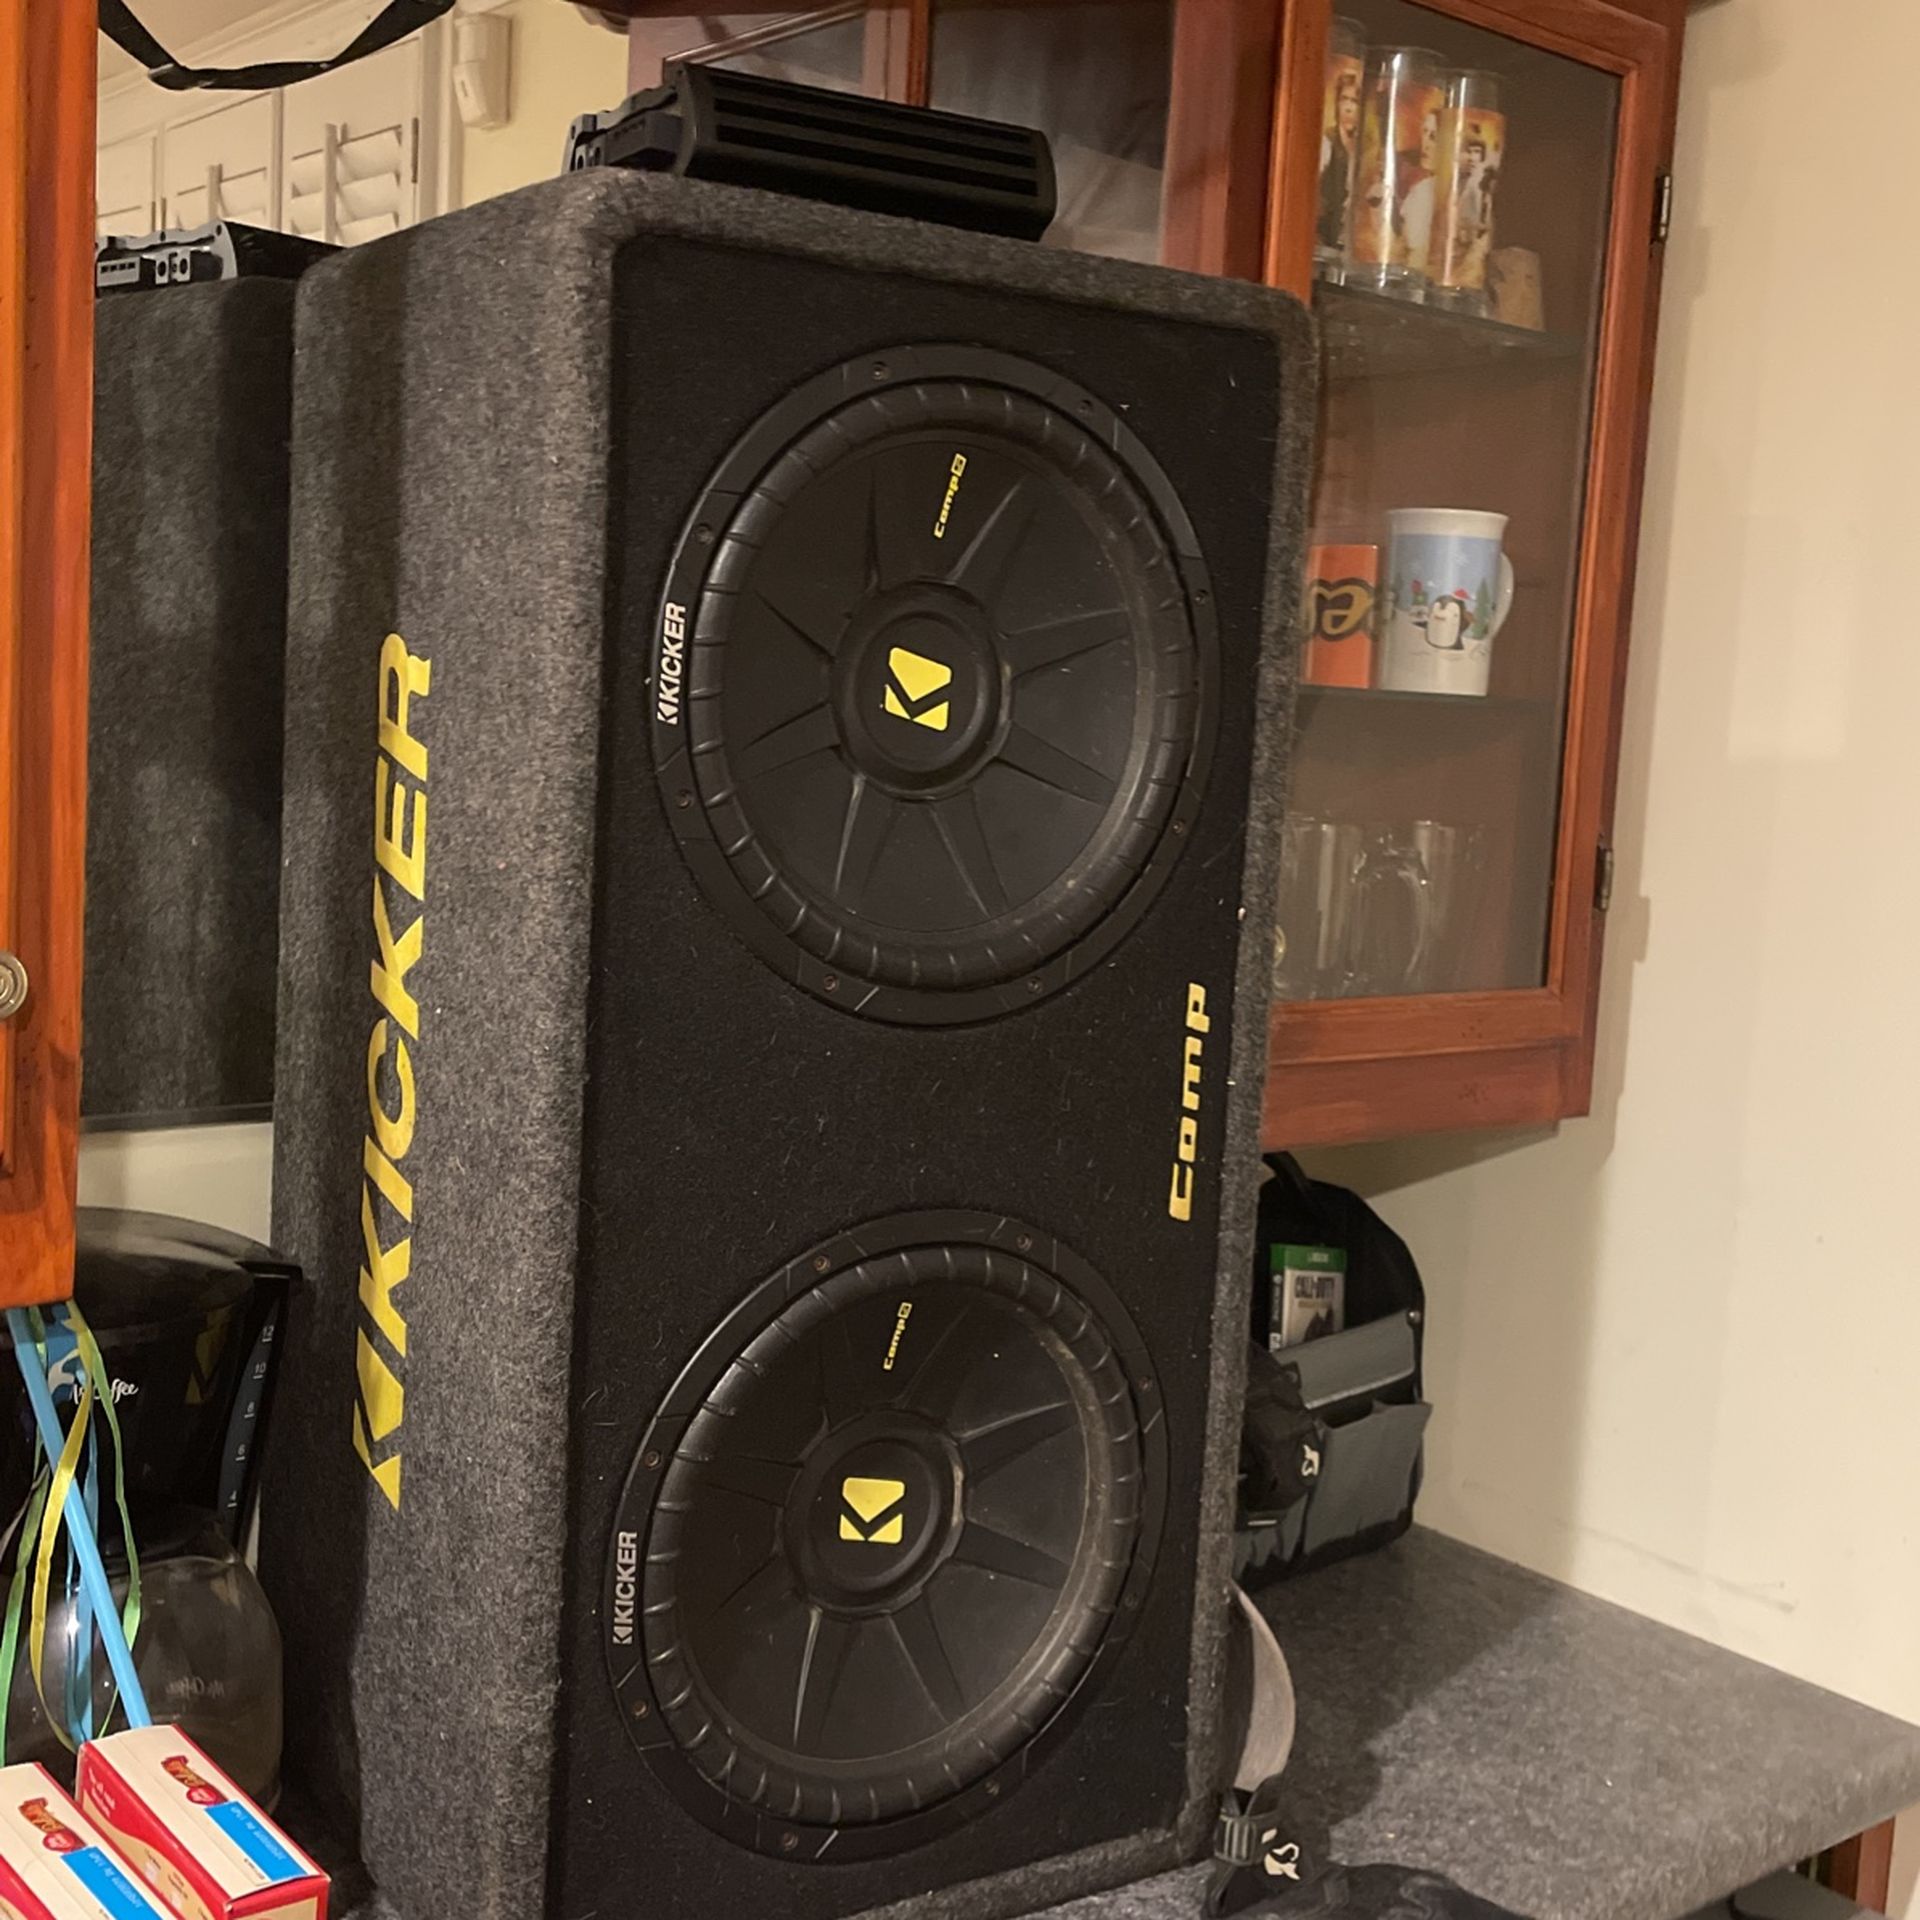 Two 12” Kickerz Comp Speakers With Amp , Does Not Have Amp Kit. Will Negotiate So Throw Offers